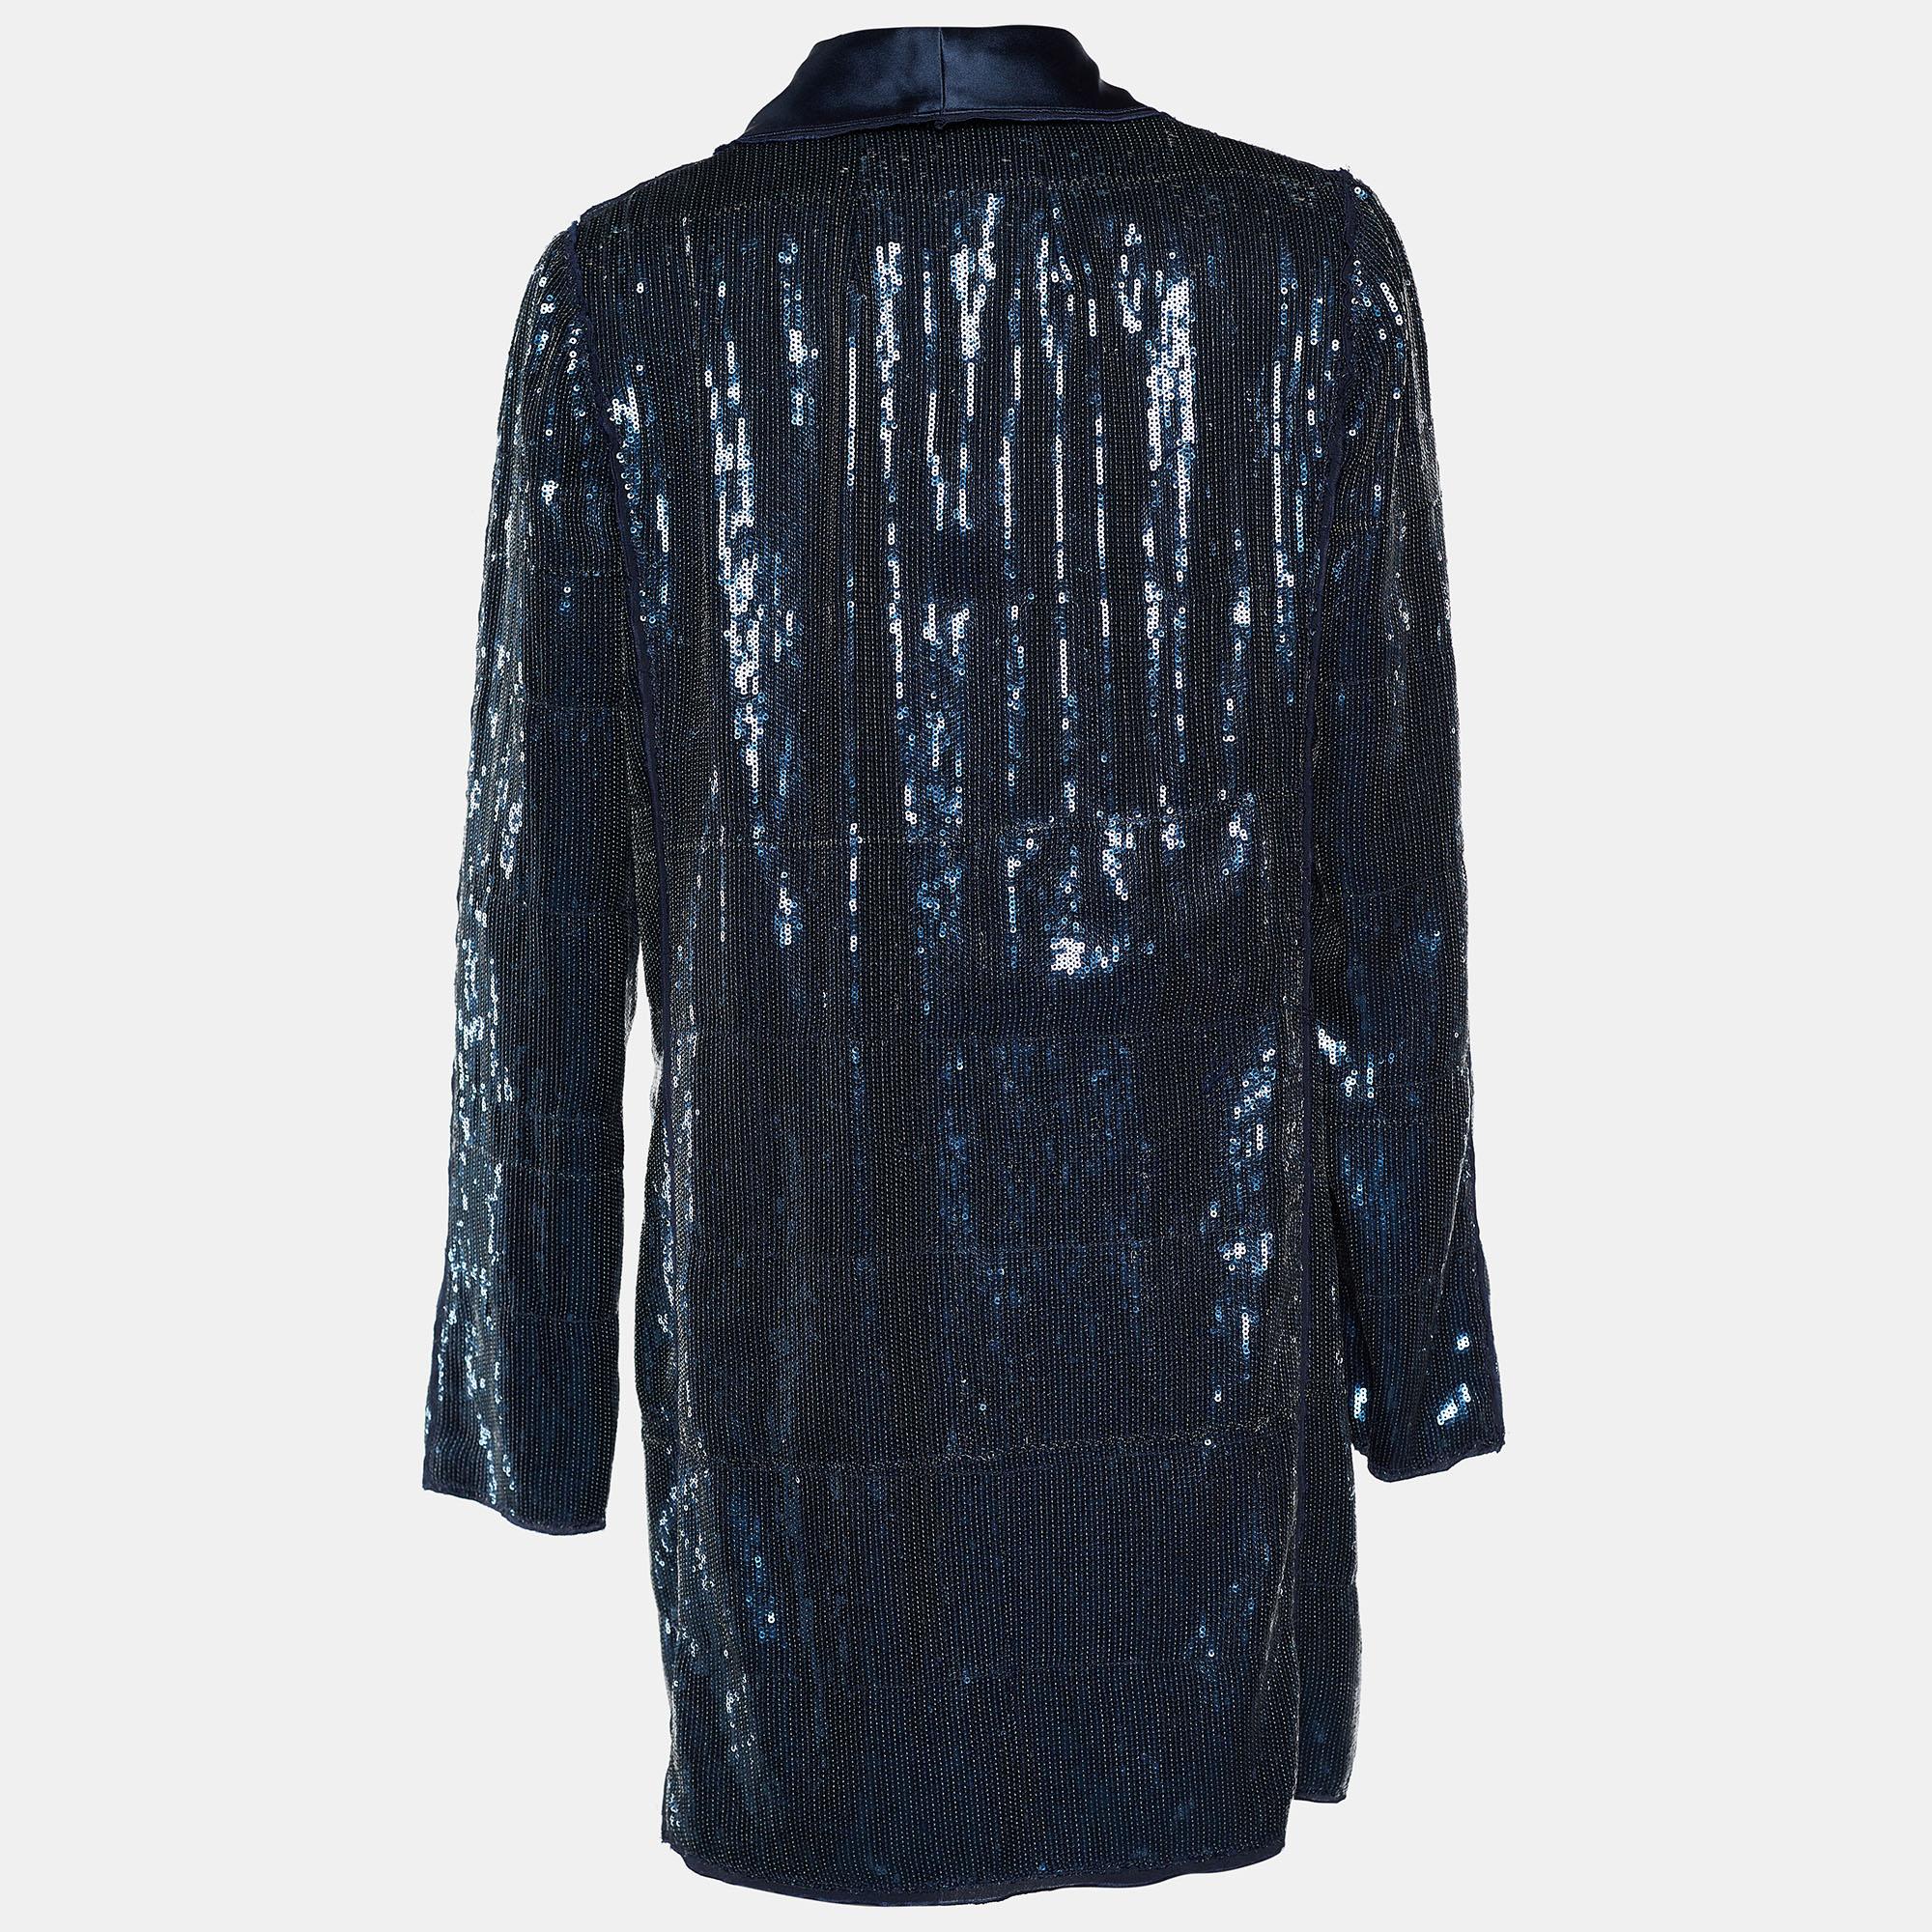 Shine through the evening as you wear this fabulous blazer from the House of Dolce & Gabbana! Doused in sequins, this blue blazer has a long length with a single button closure on the front. It has long sleeves and accommodates two pockets to store